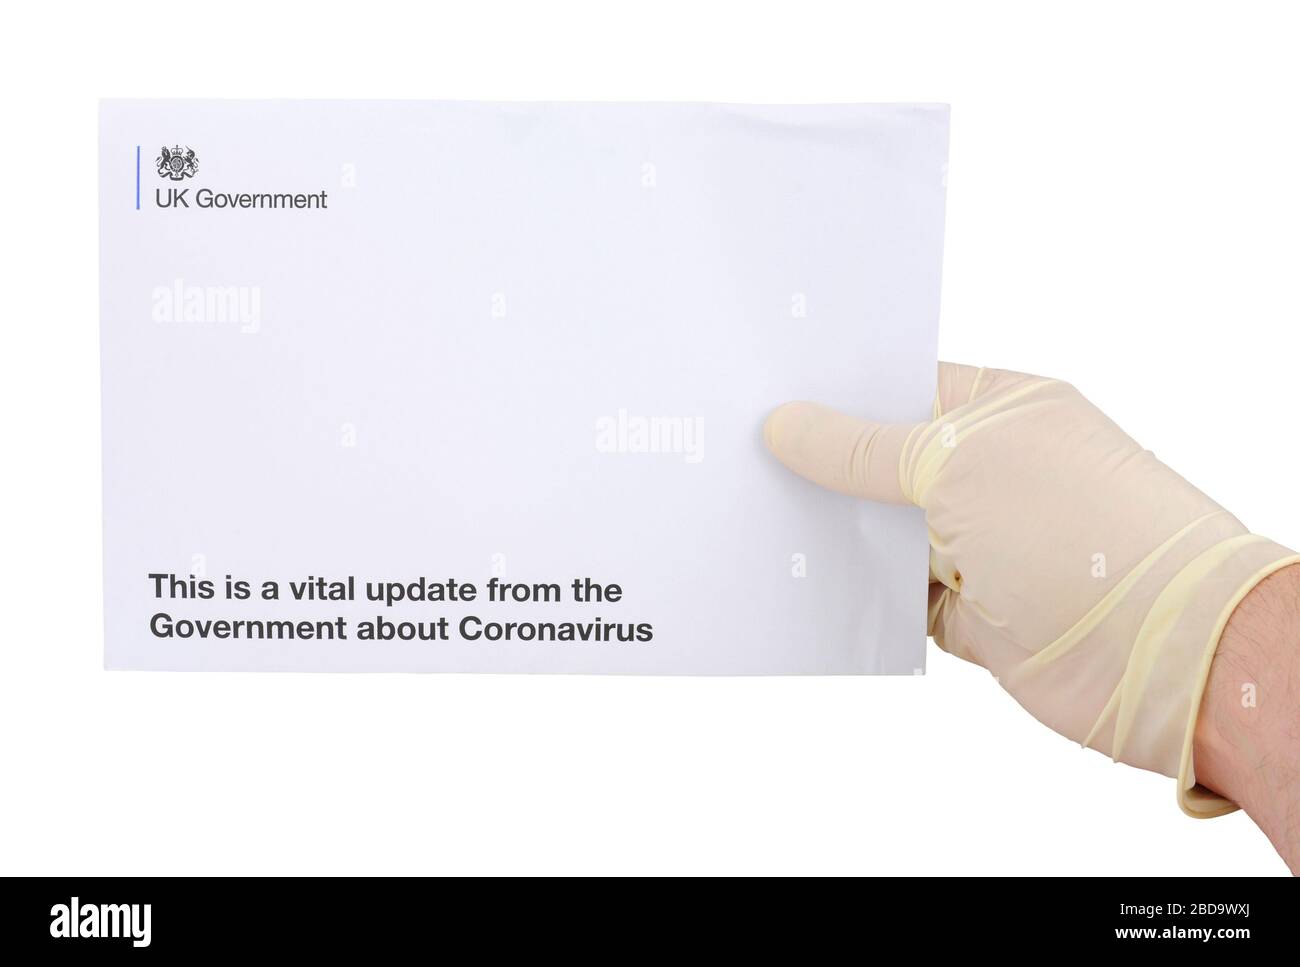 Letter envelope from United Kingdom Government to every household in UK with vital updates about Coronavirus and lock down rules, isolated on a white Stock Photo